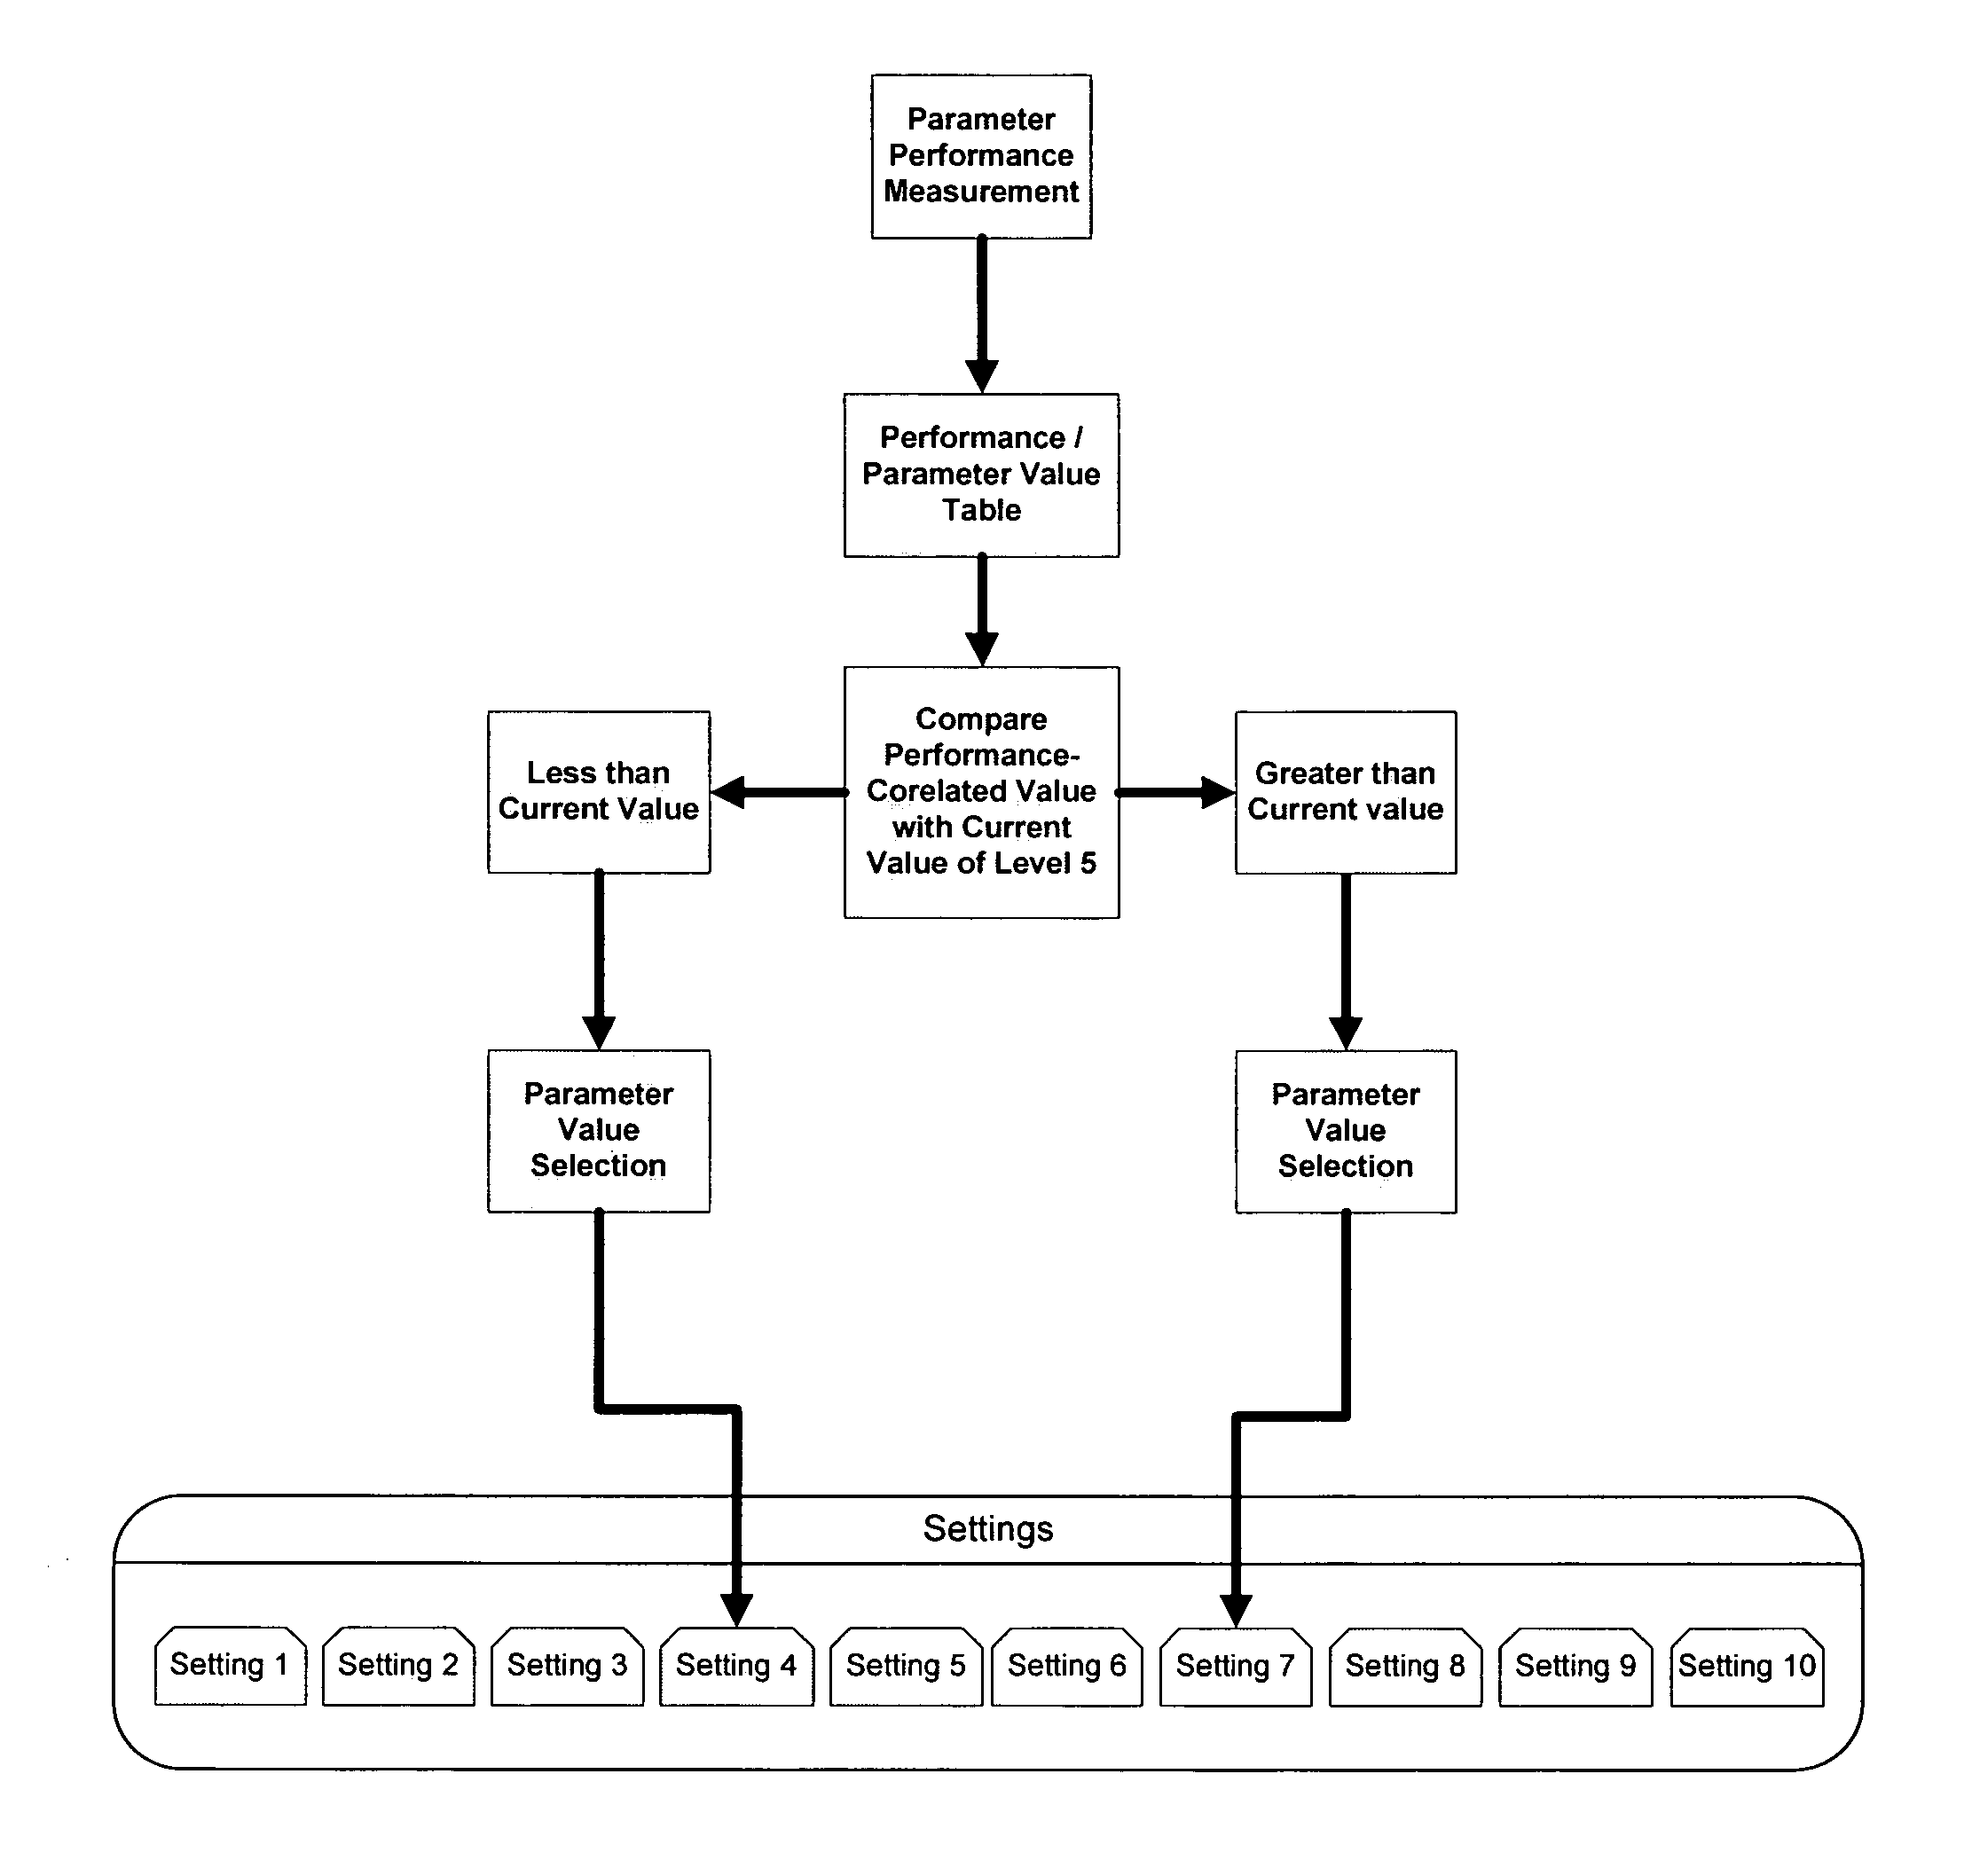 Method for dynamically adjusting an interactive application such as a videogame based on continuing assessments of user capability